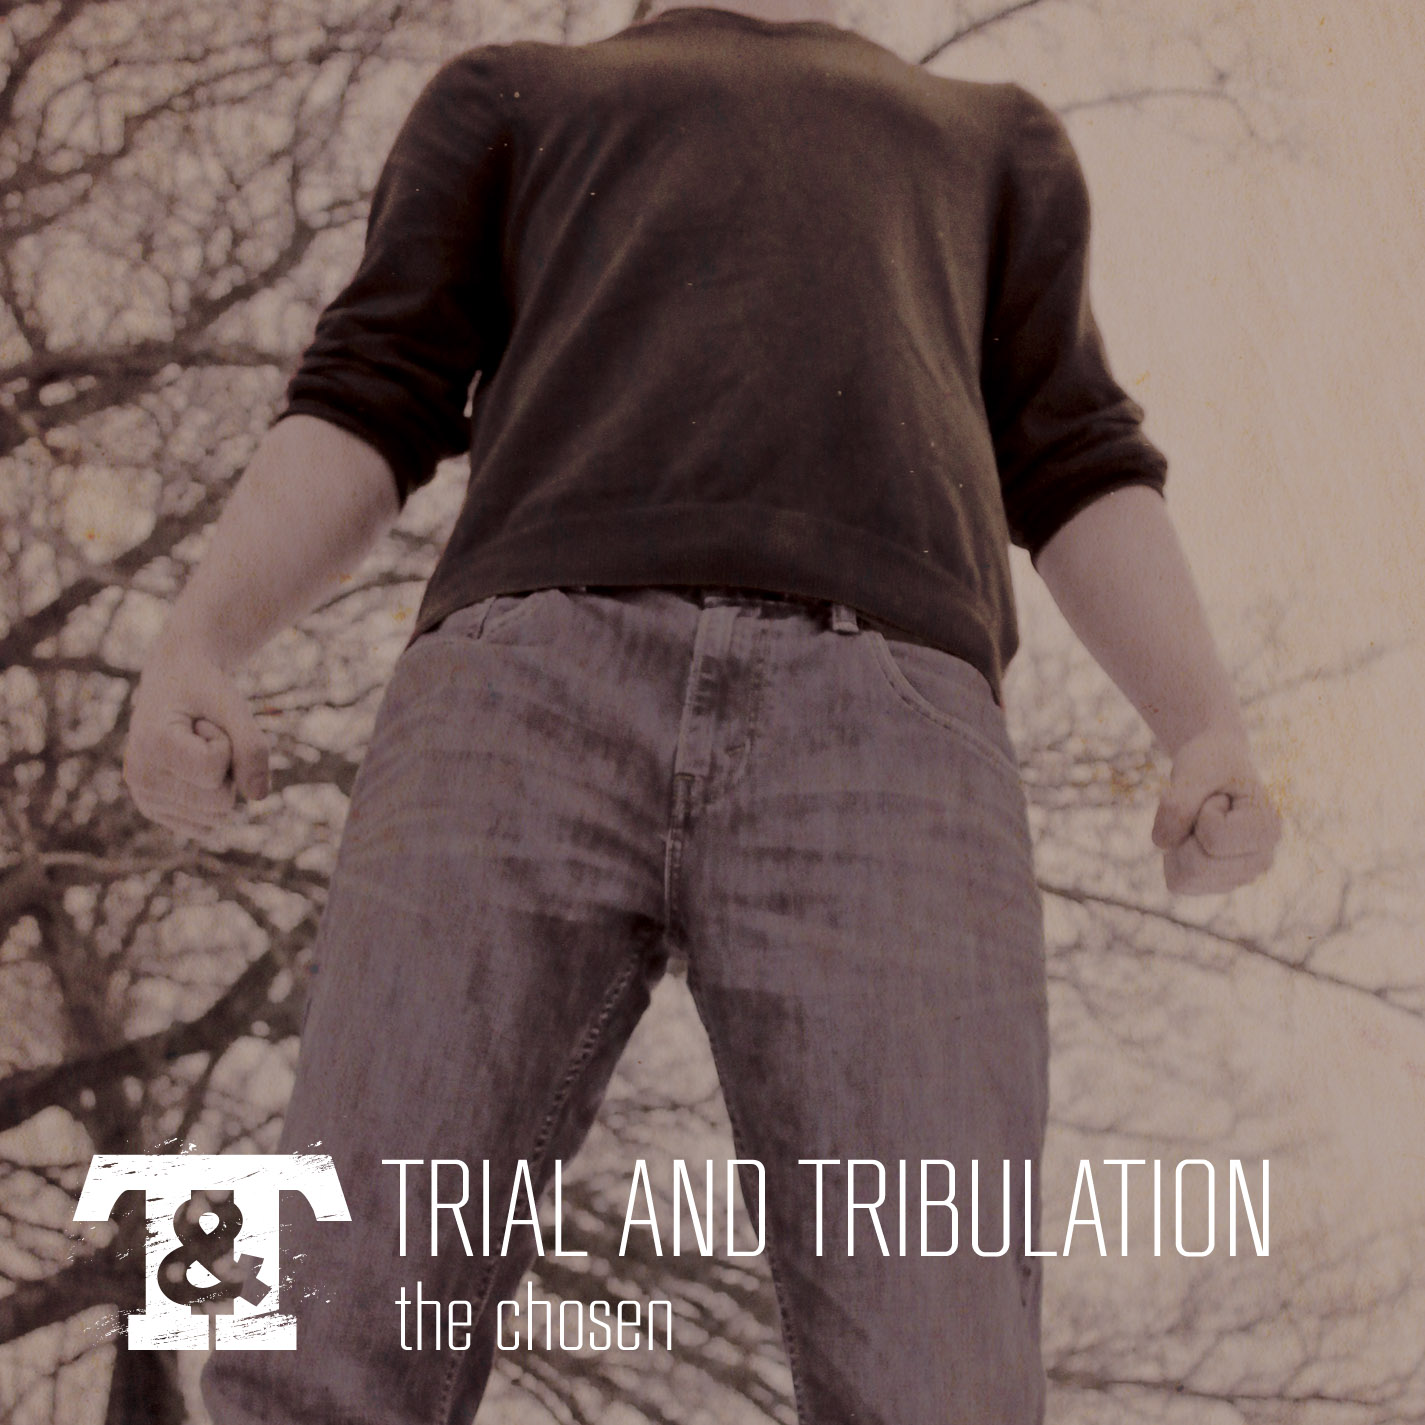 Trial and Tribulation EP Cover design